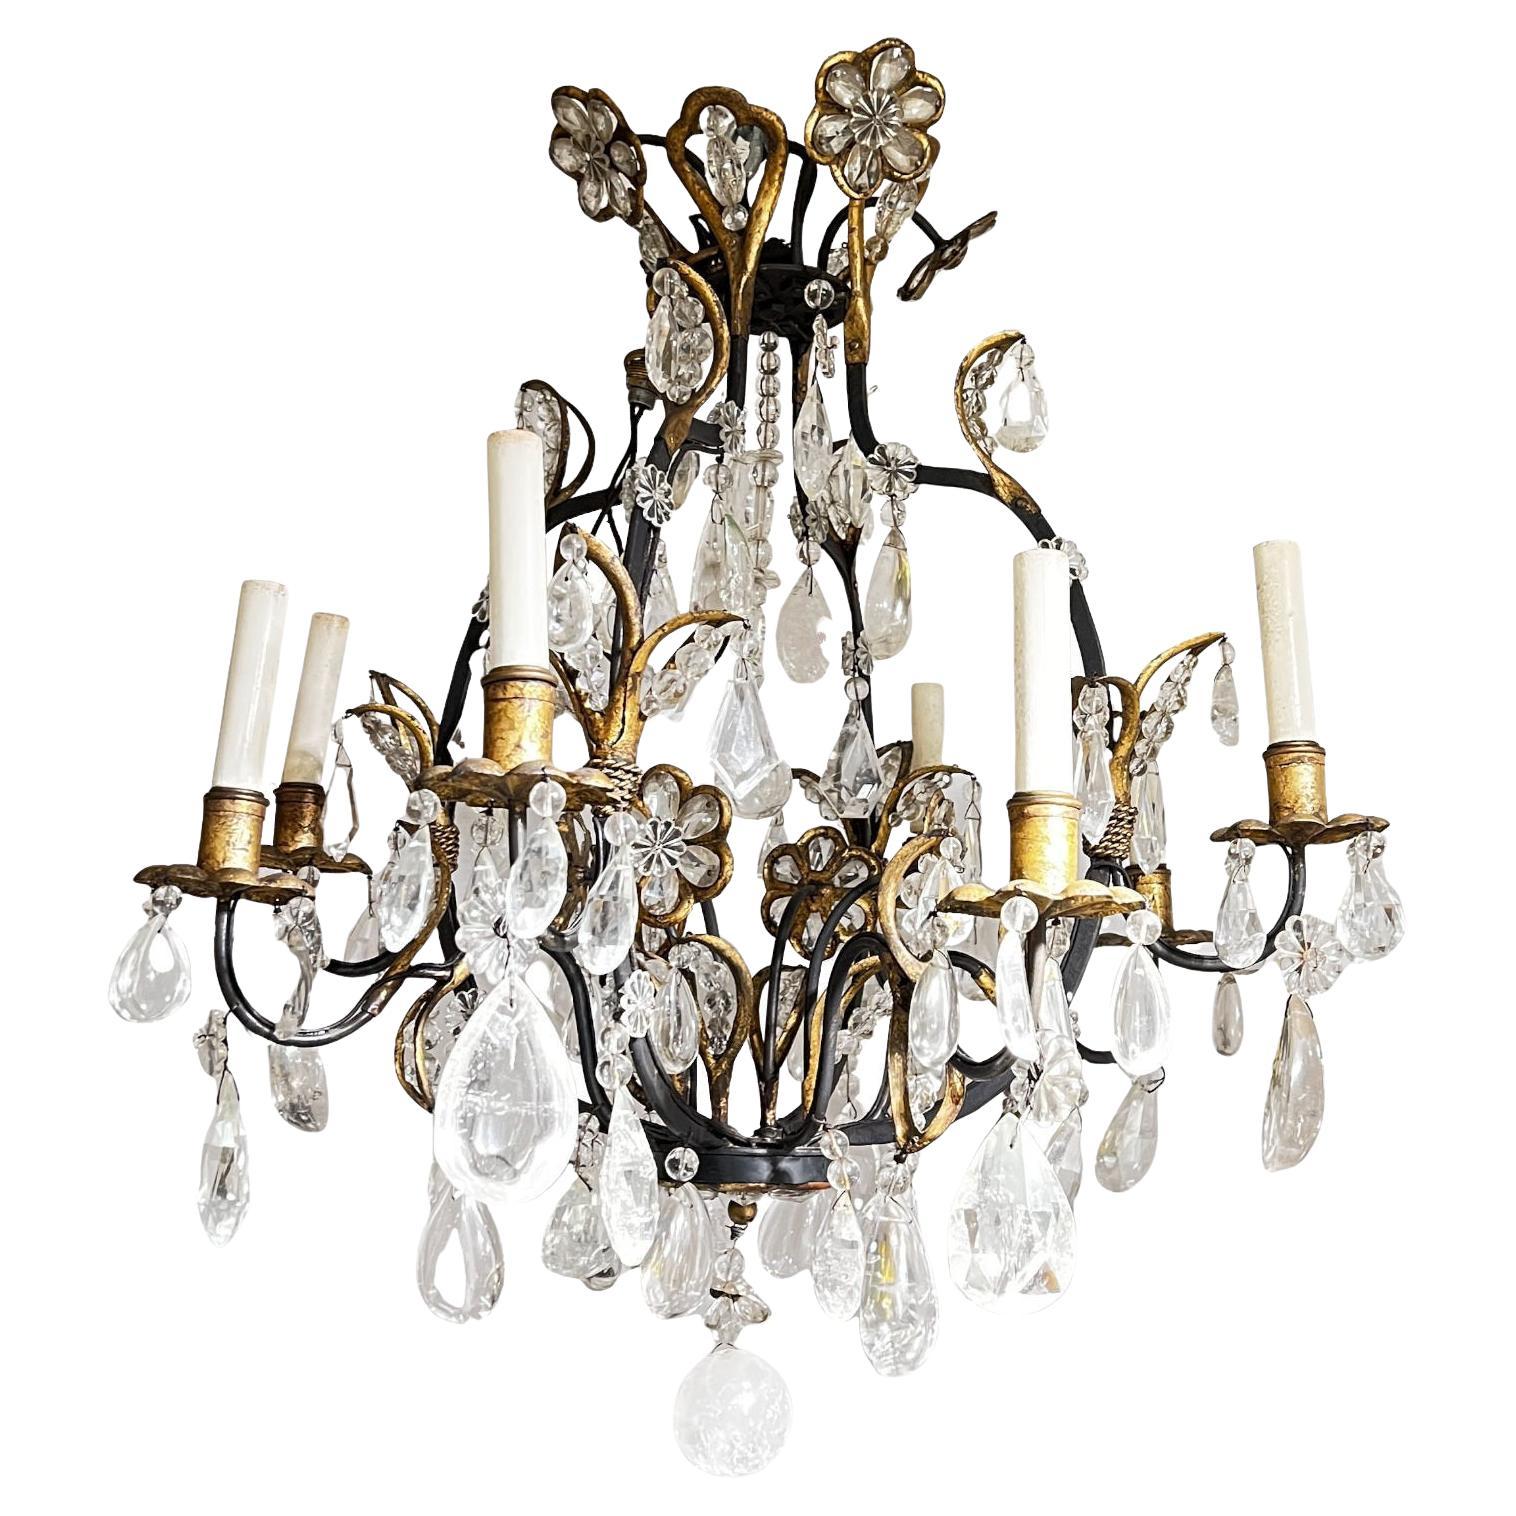 Maison Baguès Attributed Patinated Band Gilt Metal Rock Crystal Chandelier